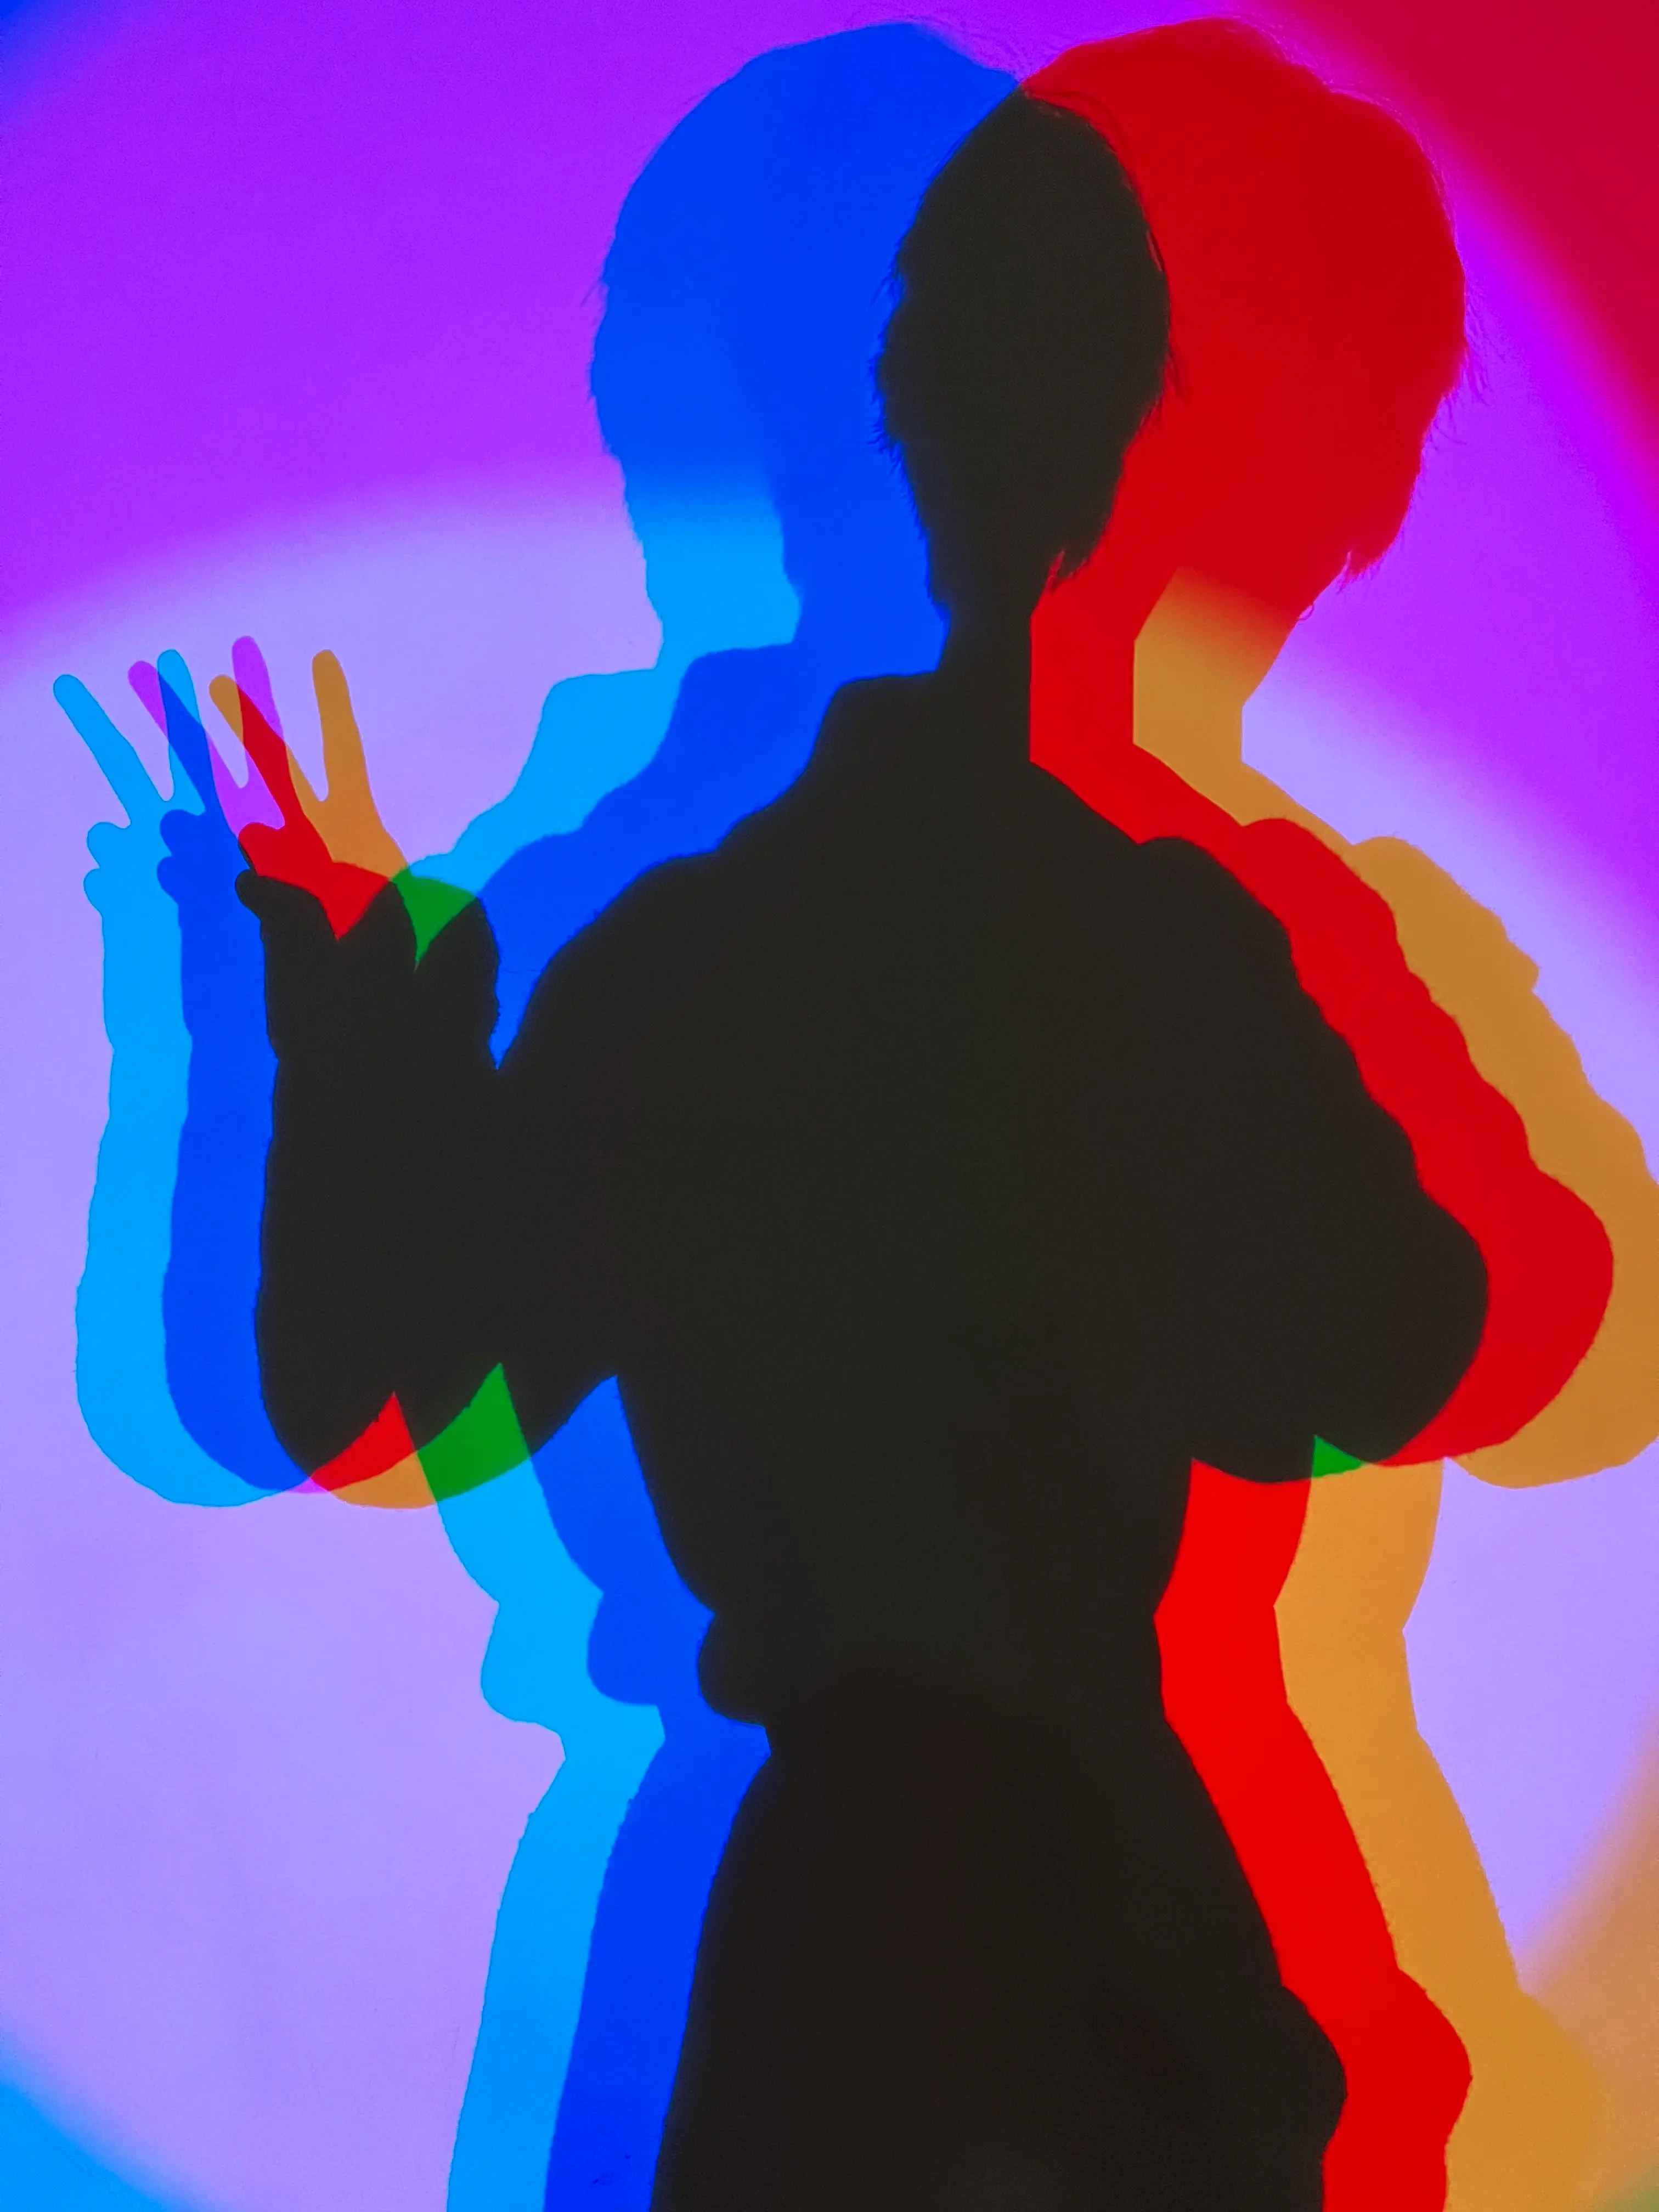 Playing with the light and getting a color shadow with my silhouette at the Museum of Science in Berlin.